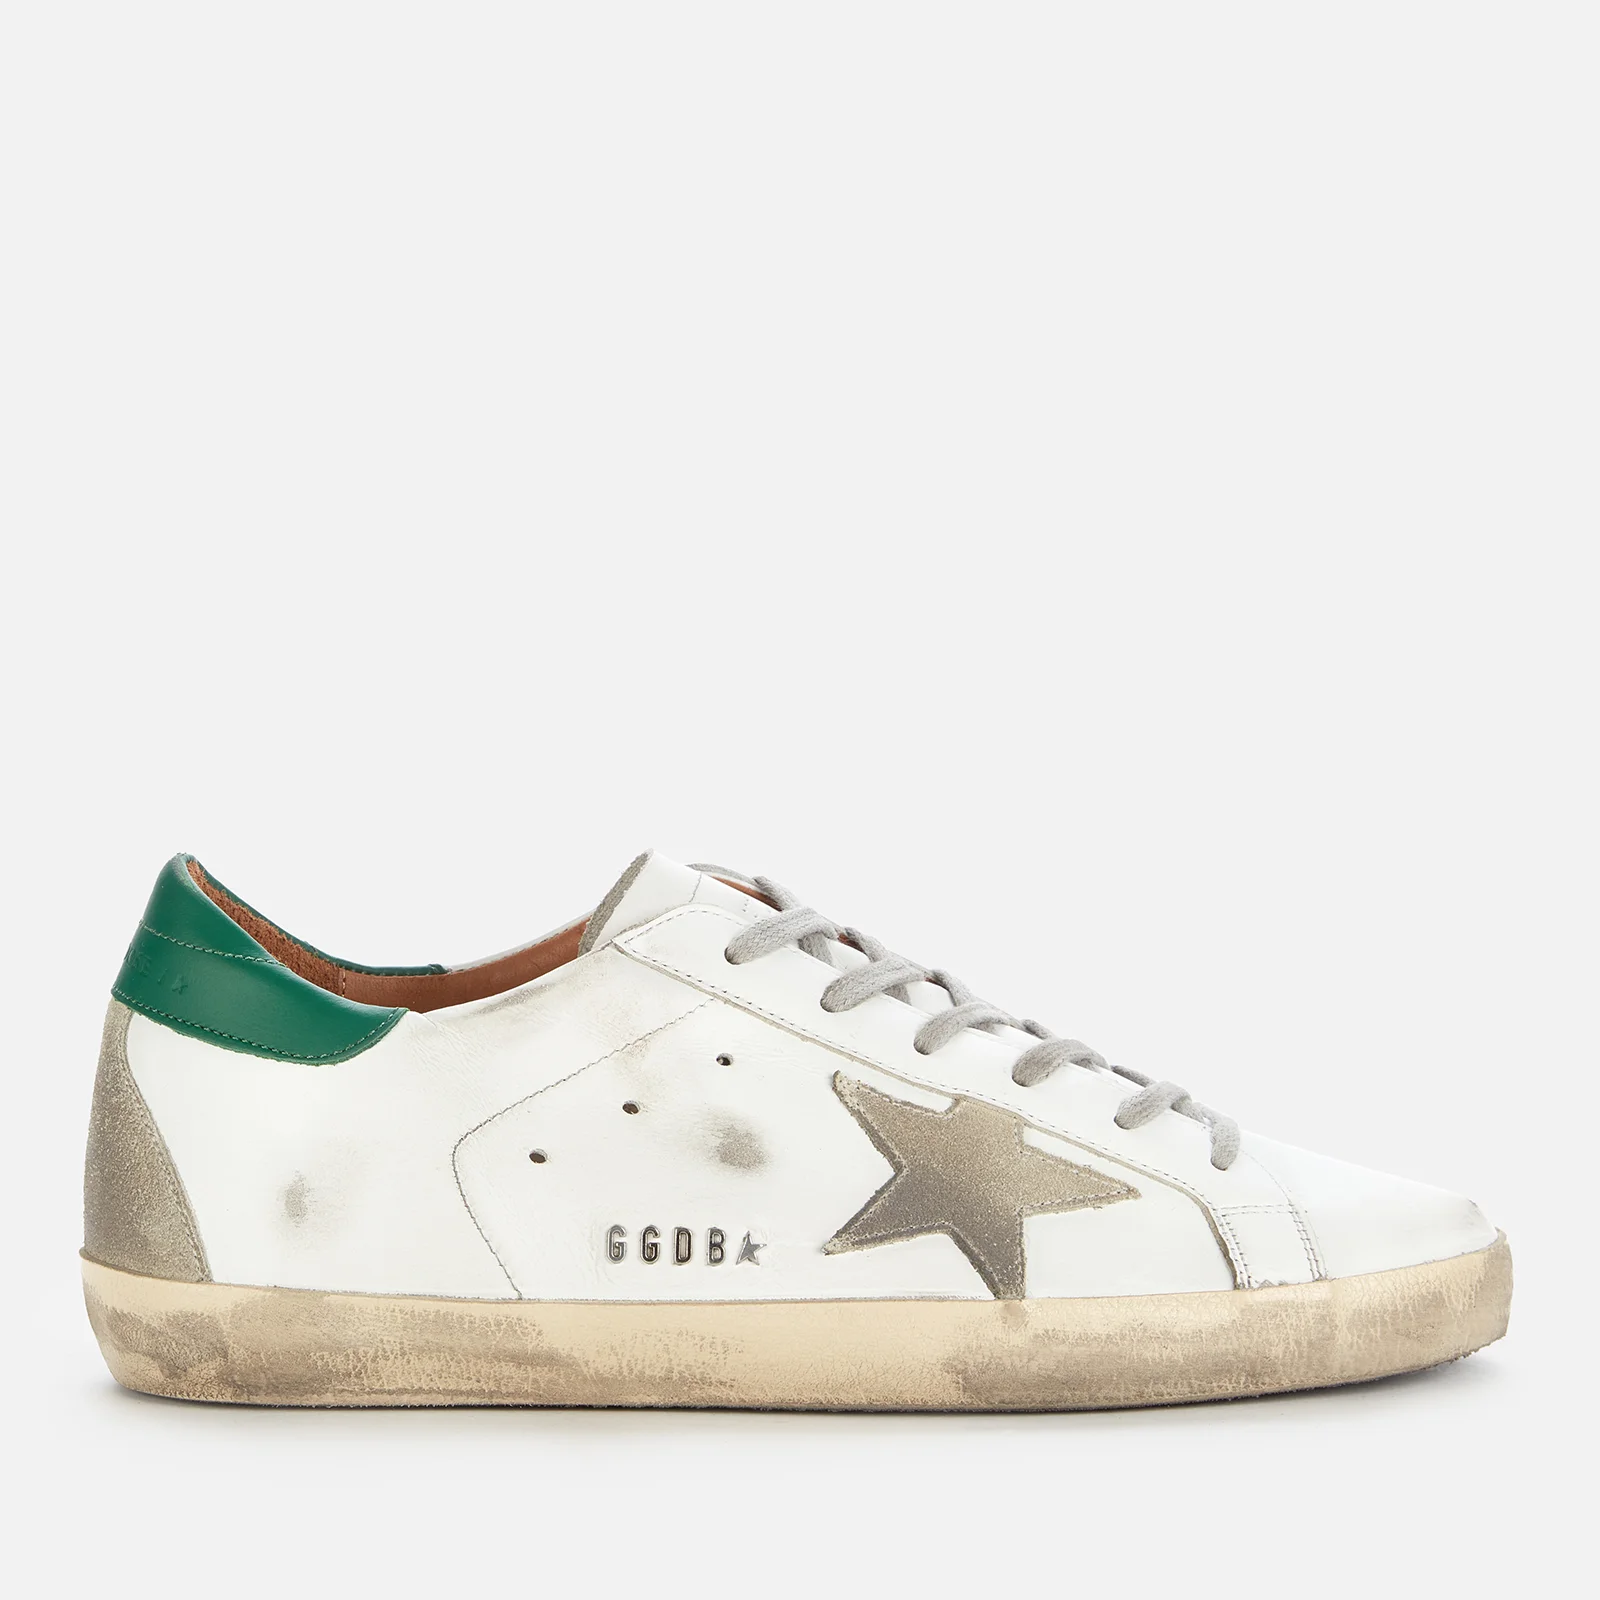 Golden Goose Women's Superstar Leather Trainers - White/Ice/Green Image 1